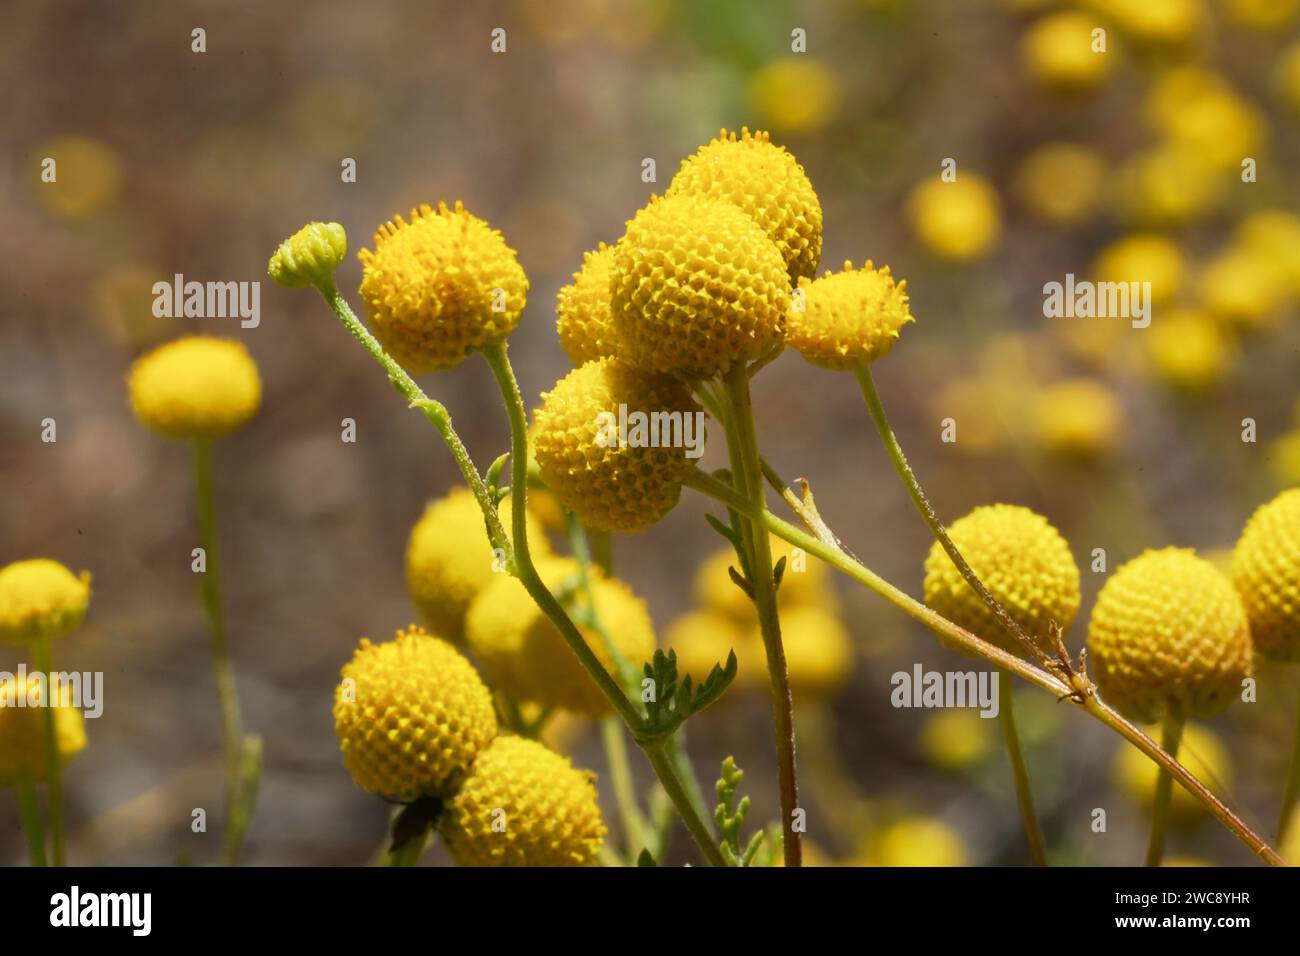 Focus on yellow Craspedia Billy Ball flowers with bokeh background Stock Photo